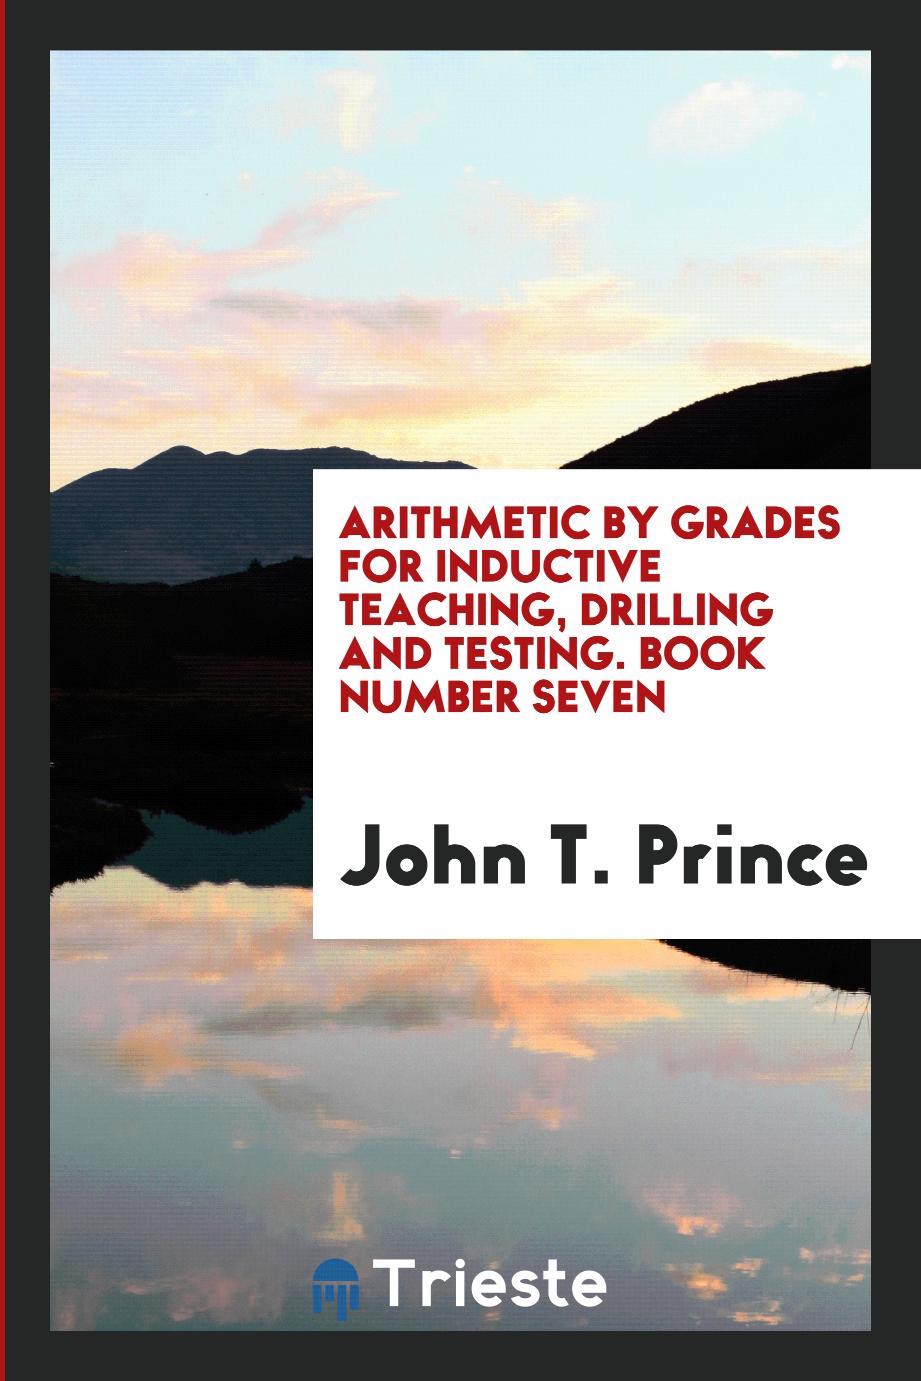 Arithmetic by Grades for Inductive Teaching, Drilling and Testing. Book Number Seven